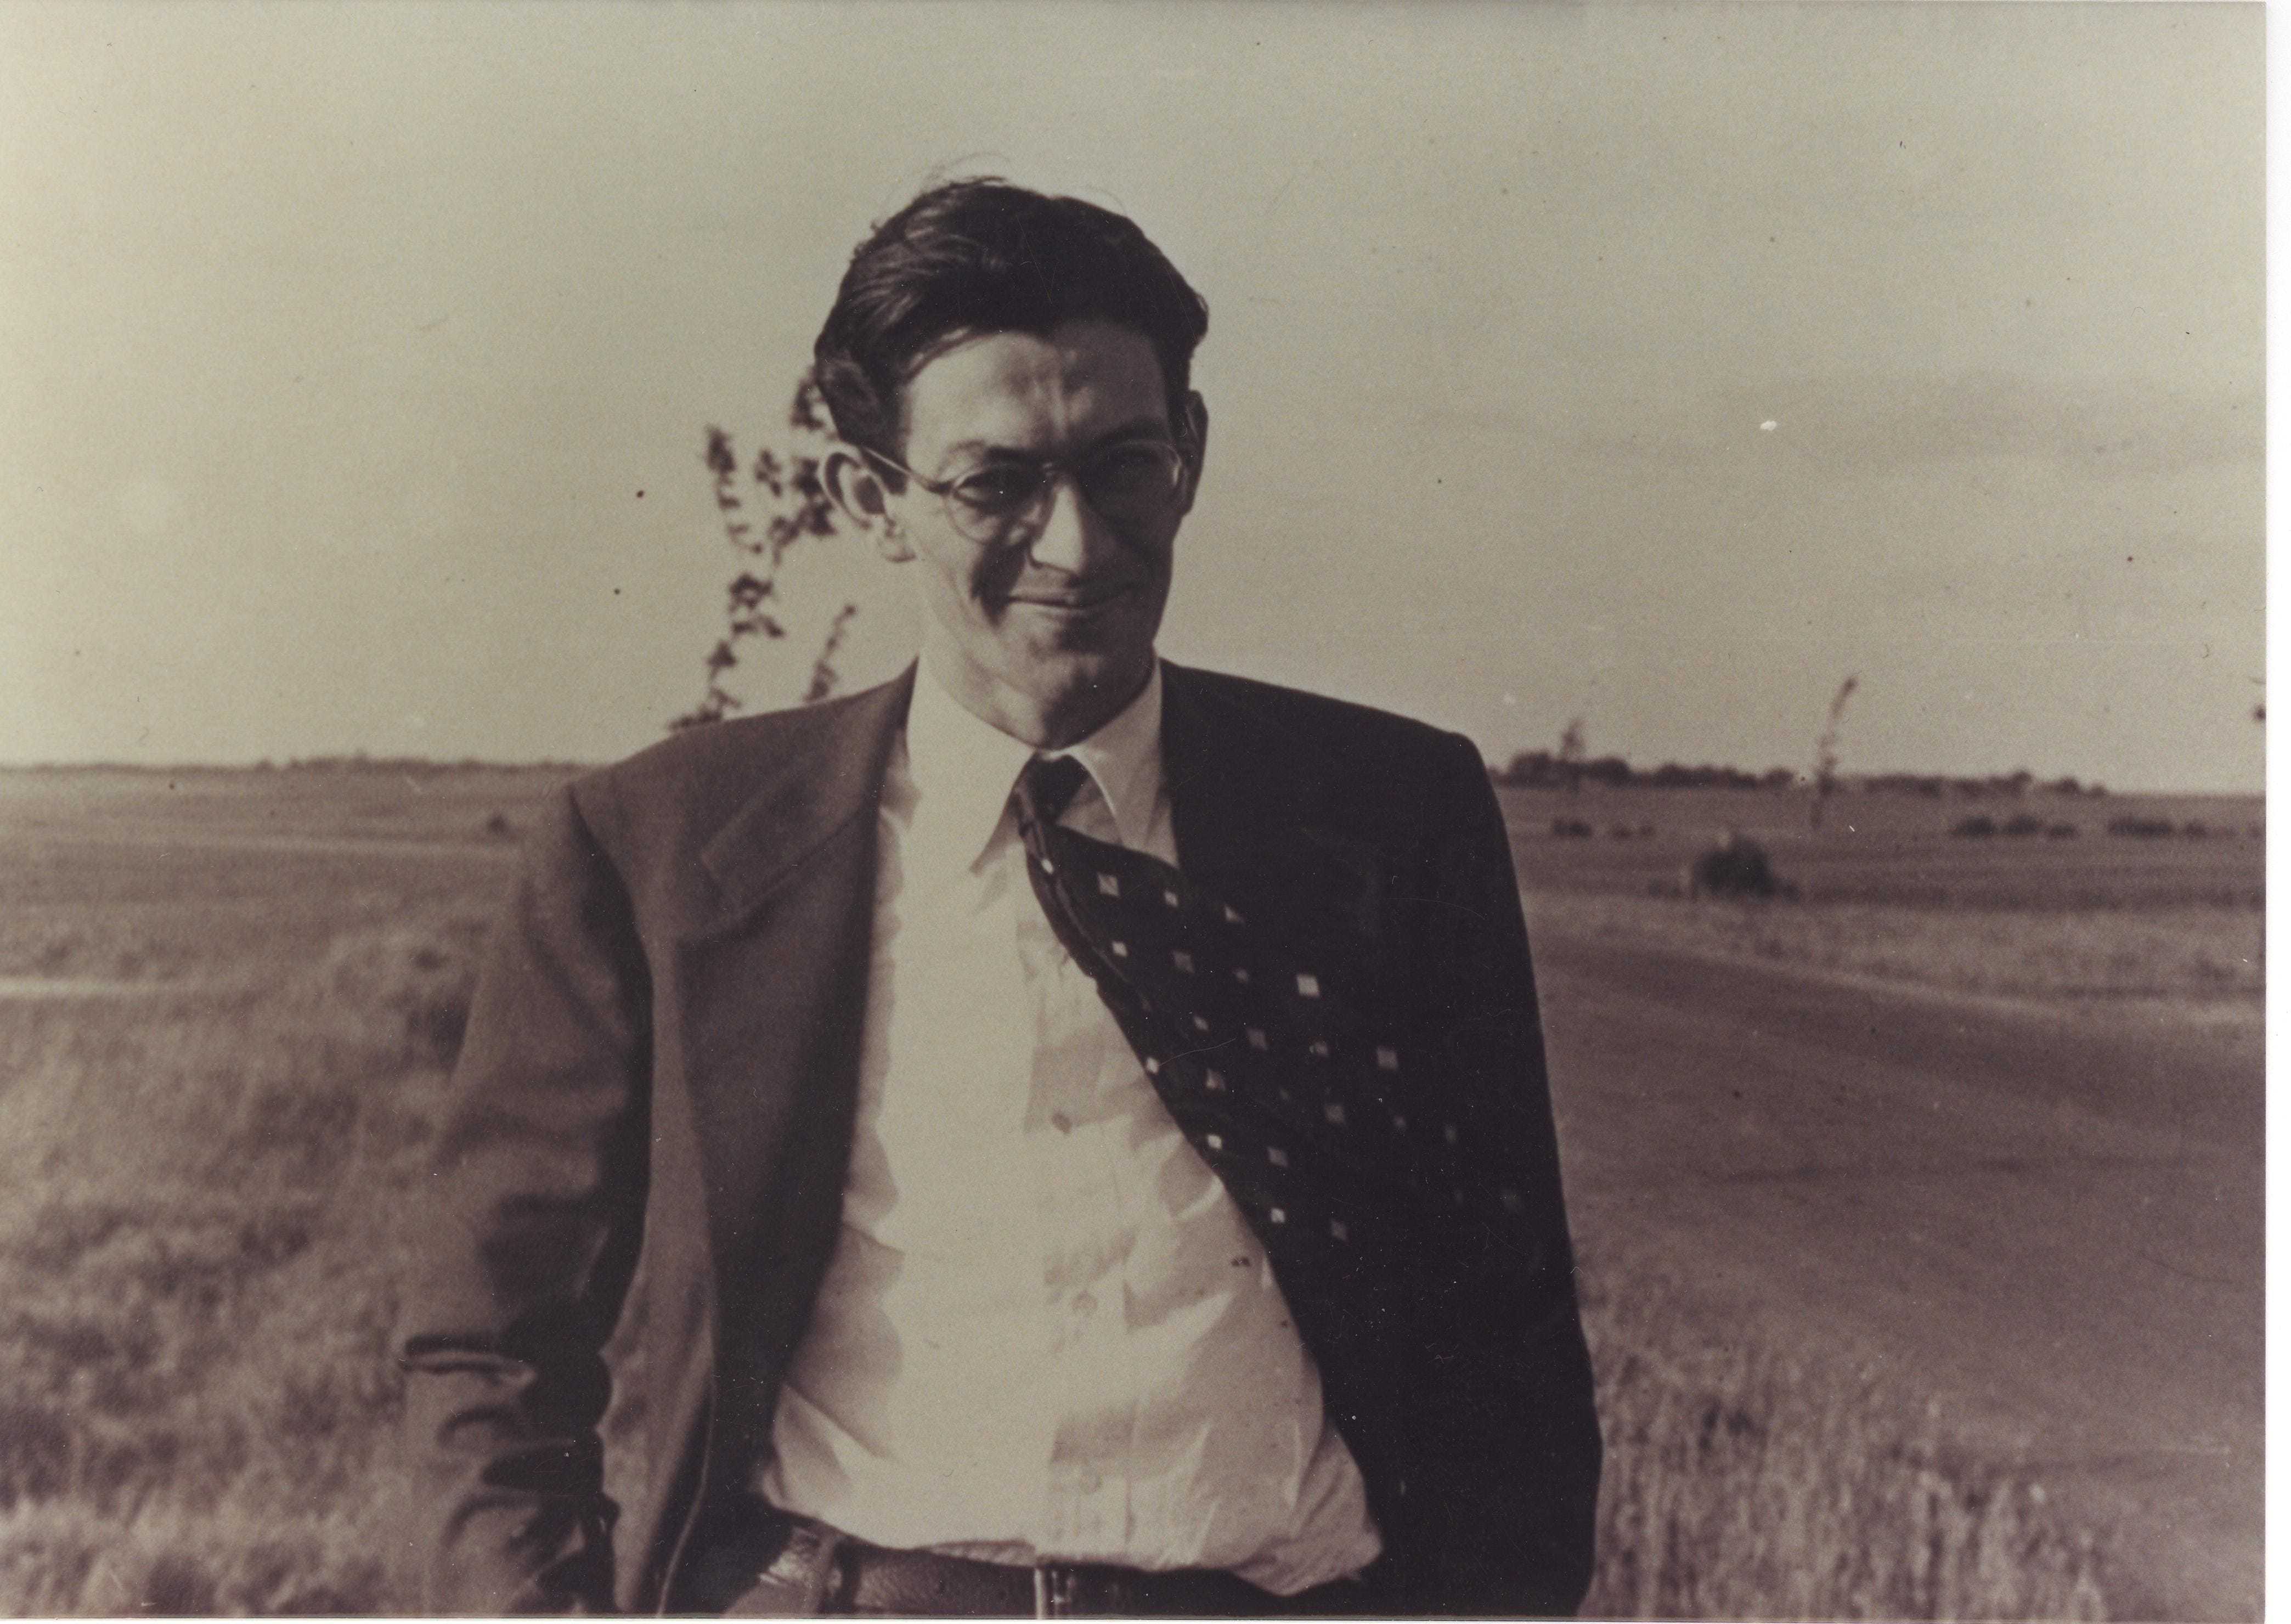 James Angleton walking in a field in Italy.